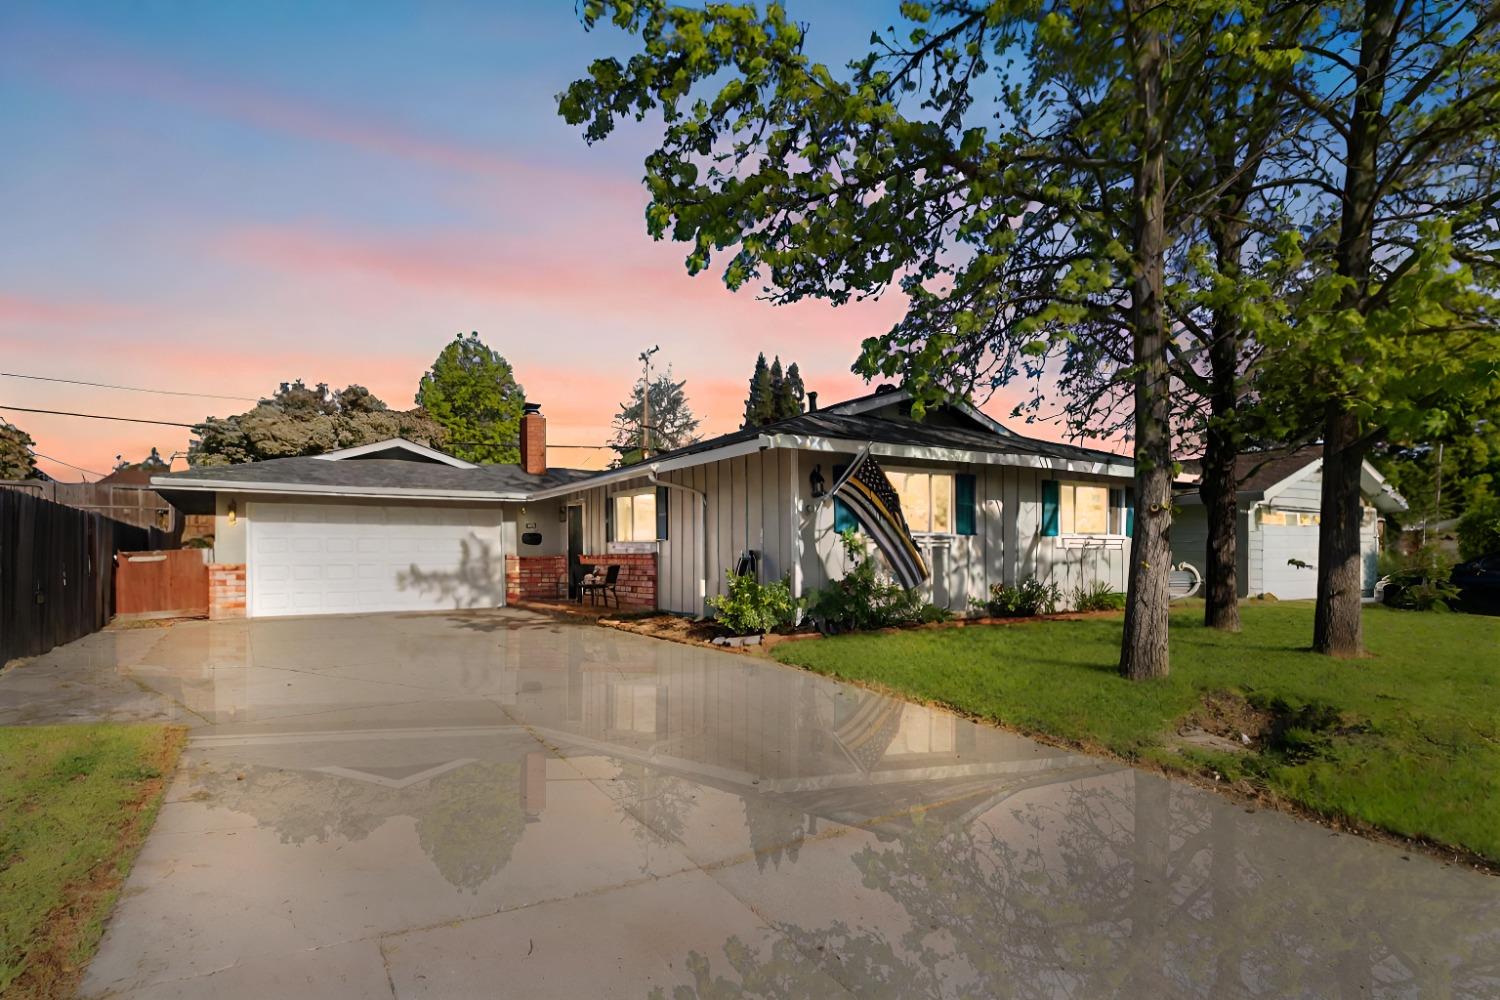 Photo of 407 Loretto Dr in Roseville, CA